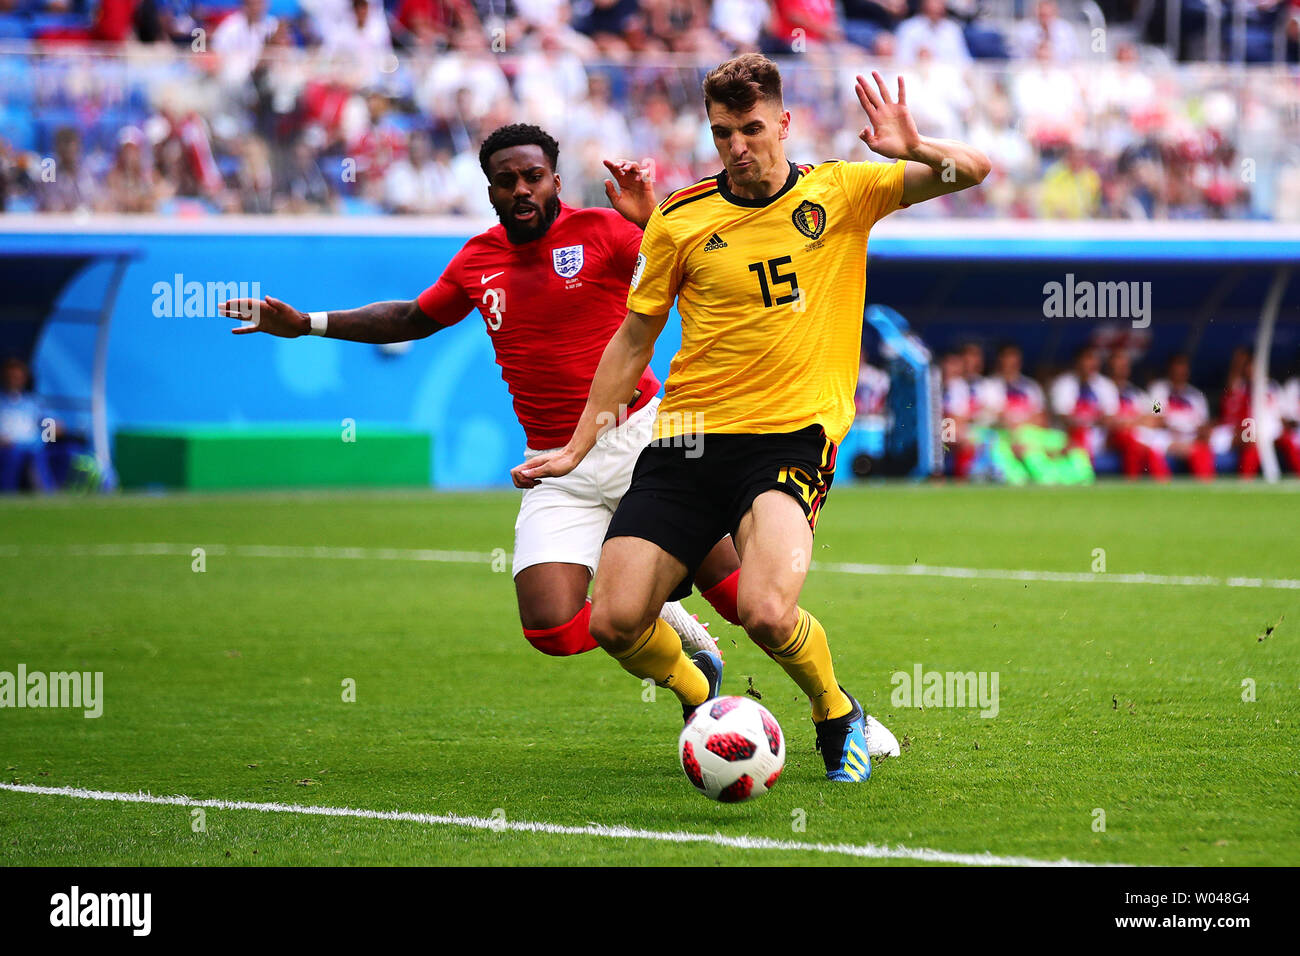 Thomas Meunier of Belgium scores the opening goal during the 2018 FIFA World Cup third place play-off match at the Saint Petersburg Stadium in Saint Petersburg, Russia on July 14, 2018. Belgium beat England 2-0 to finish third. Photo by Chris Brunskill/UPI Stock Photo